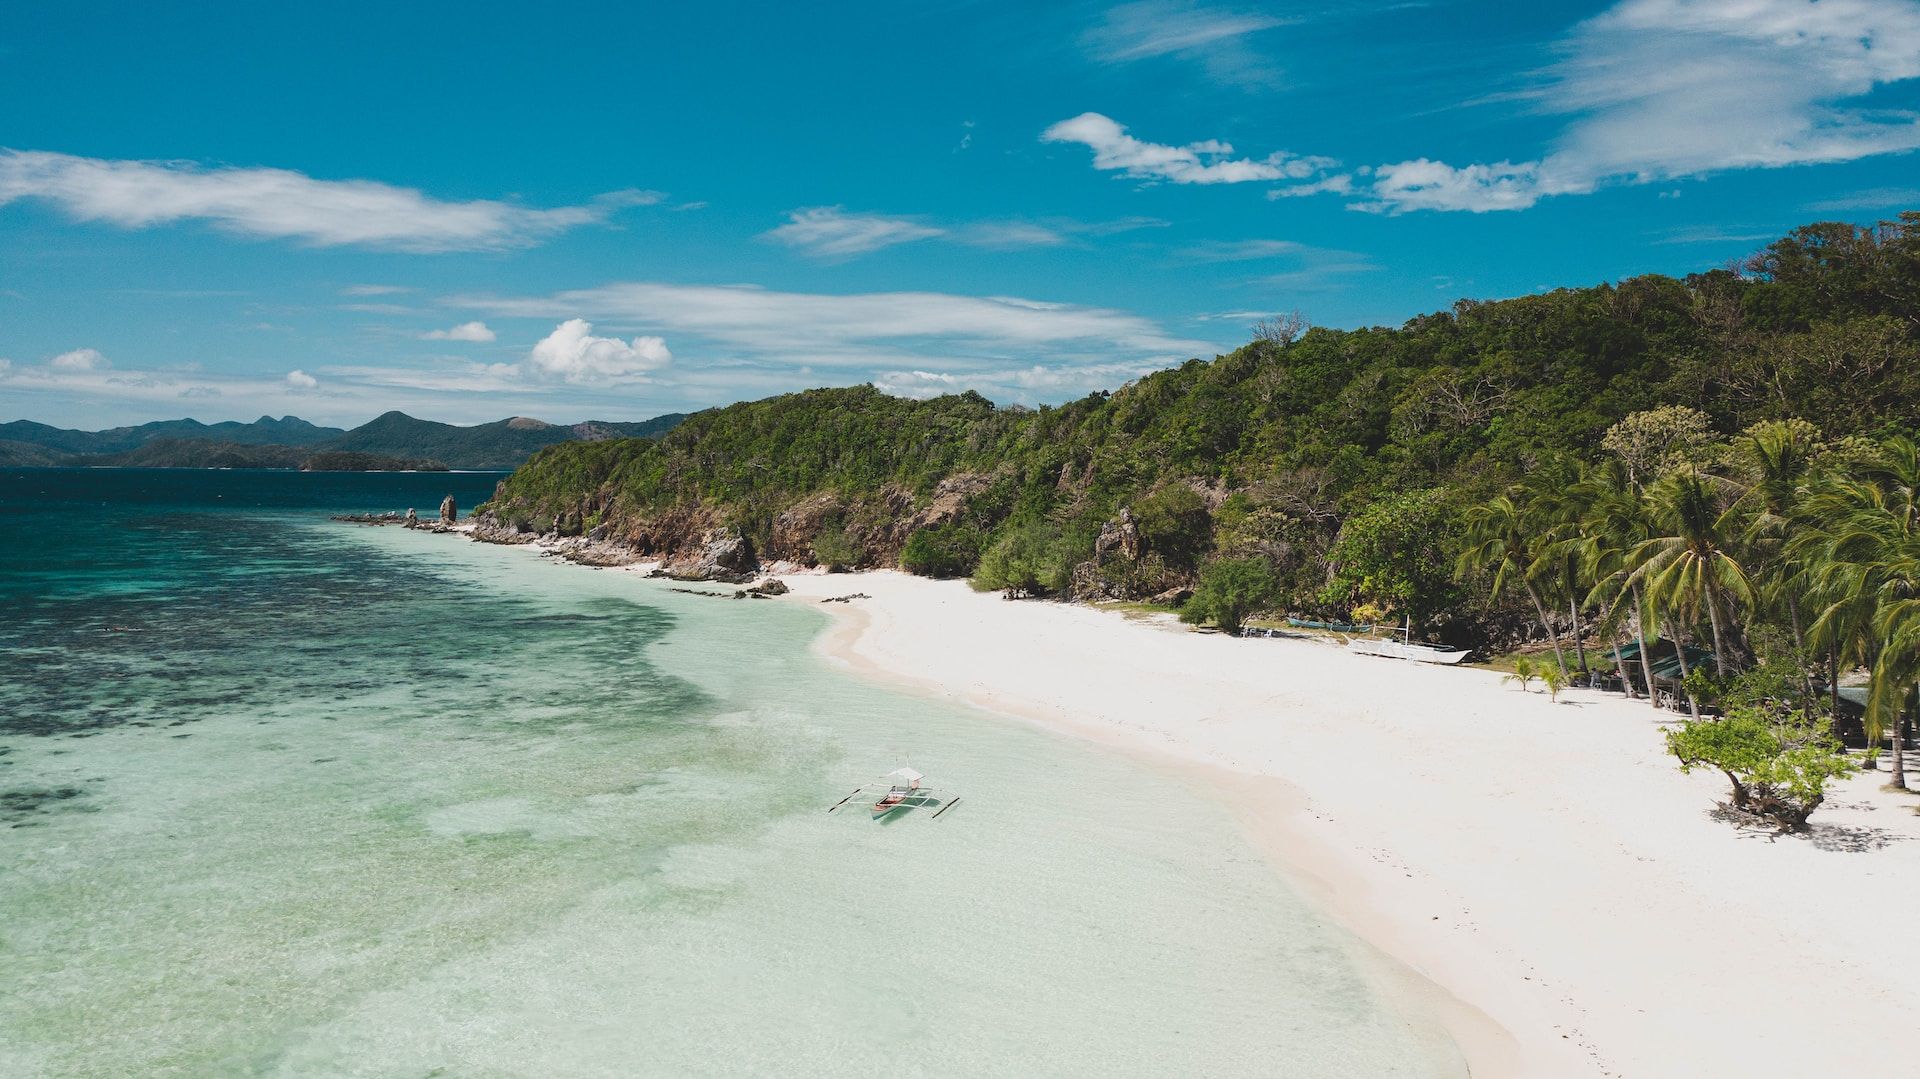 A beautiful white sand beach in the Philippines